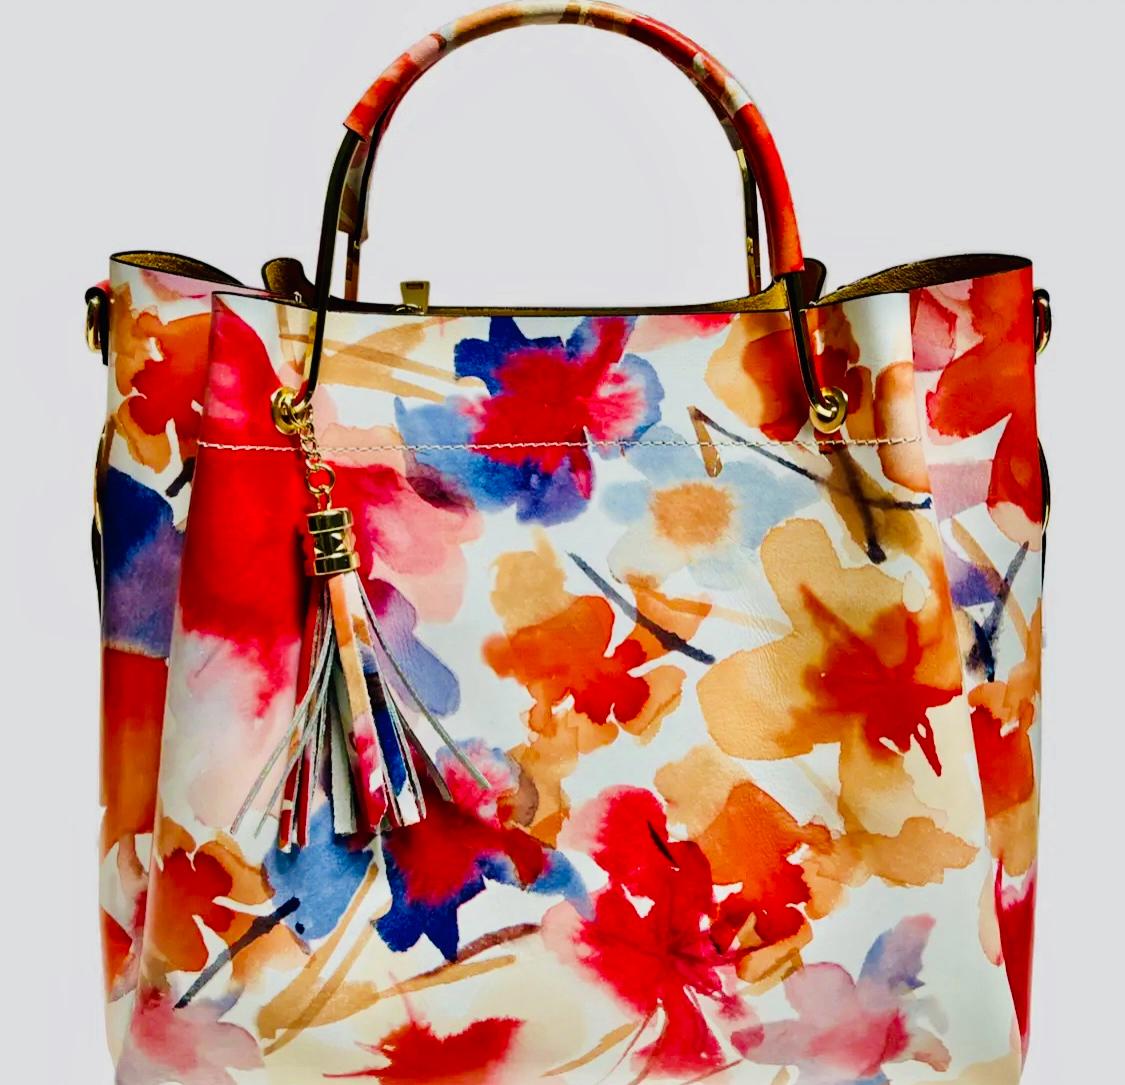 The Busy Red Flower Bag